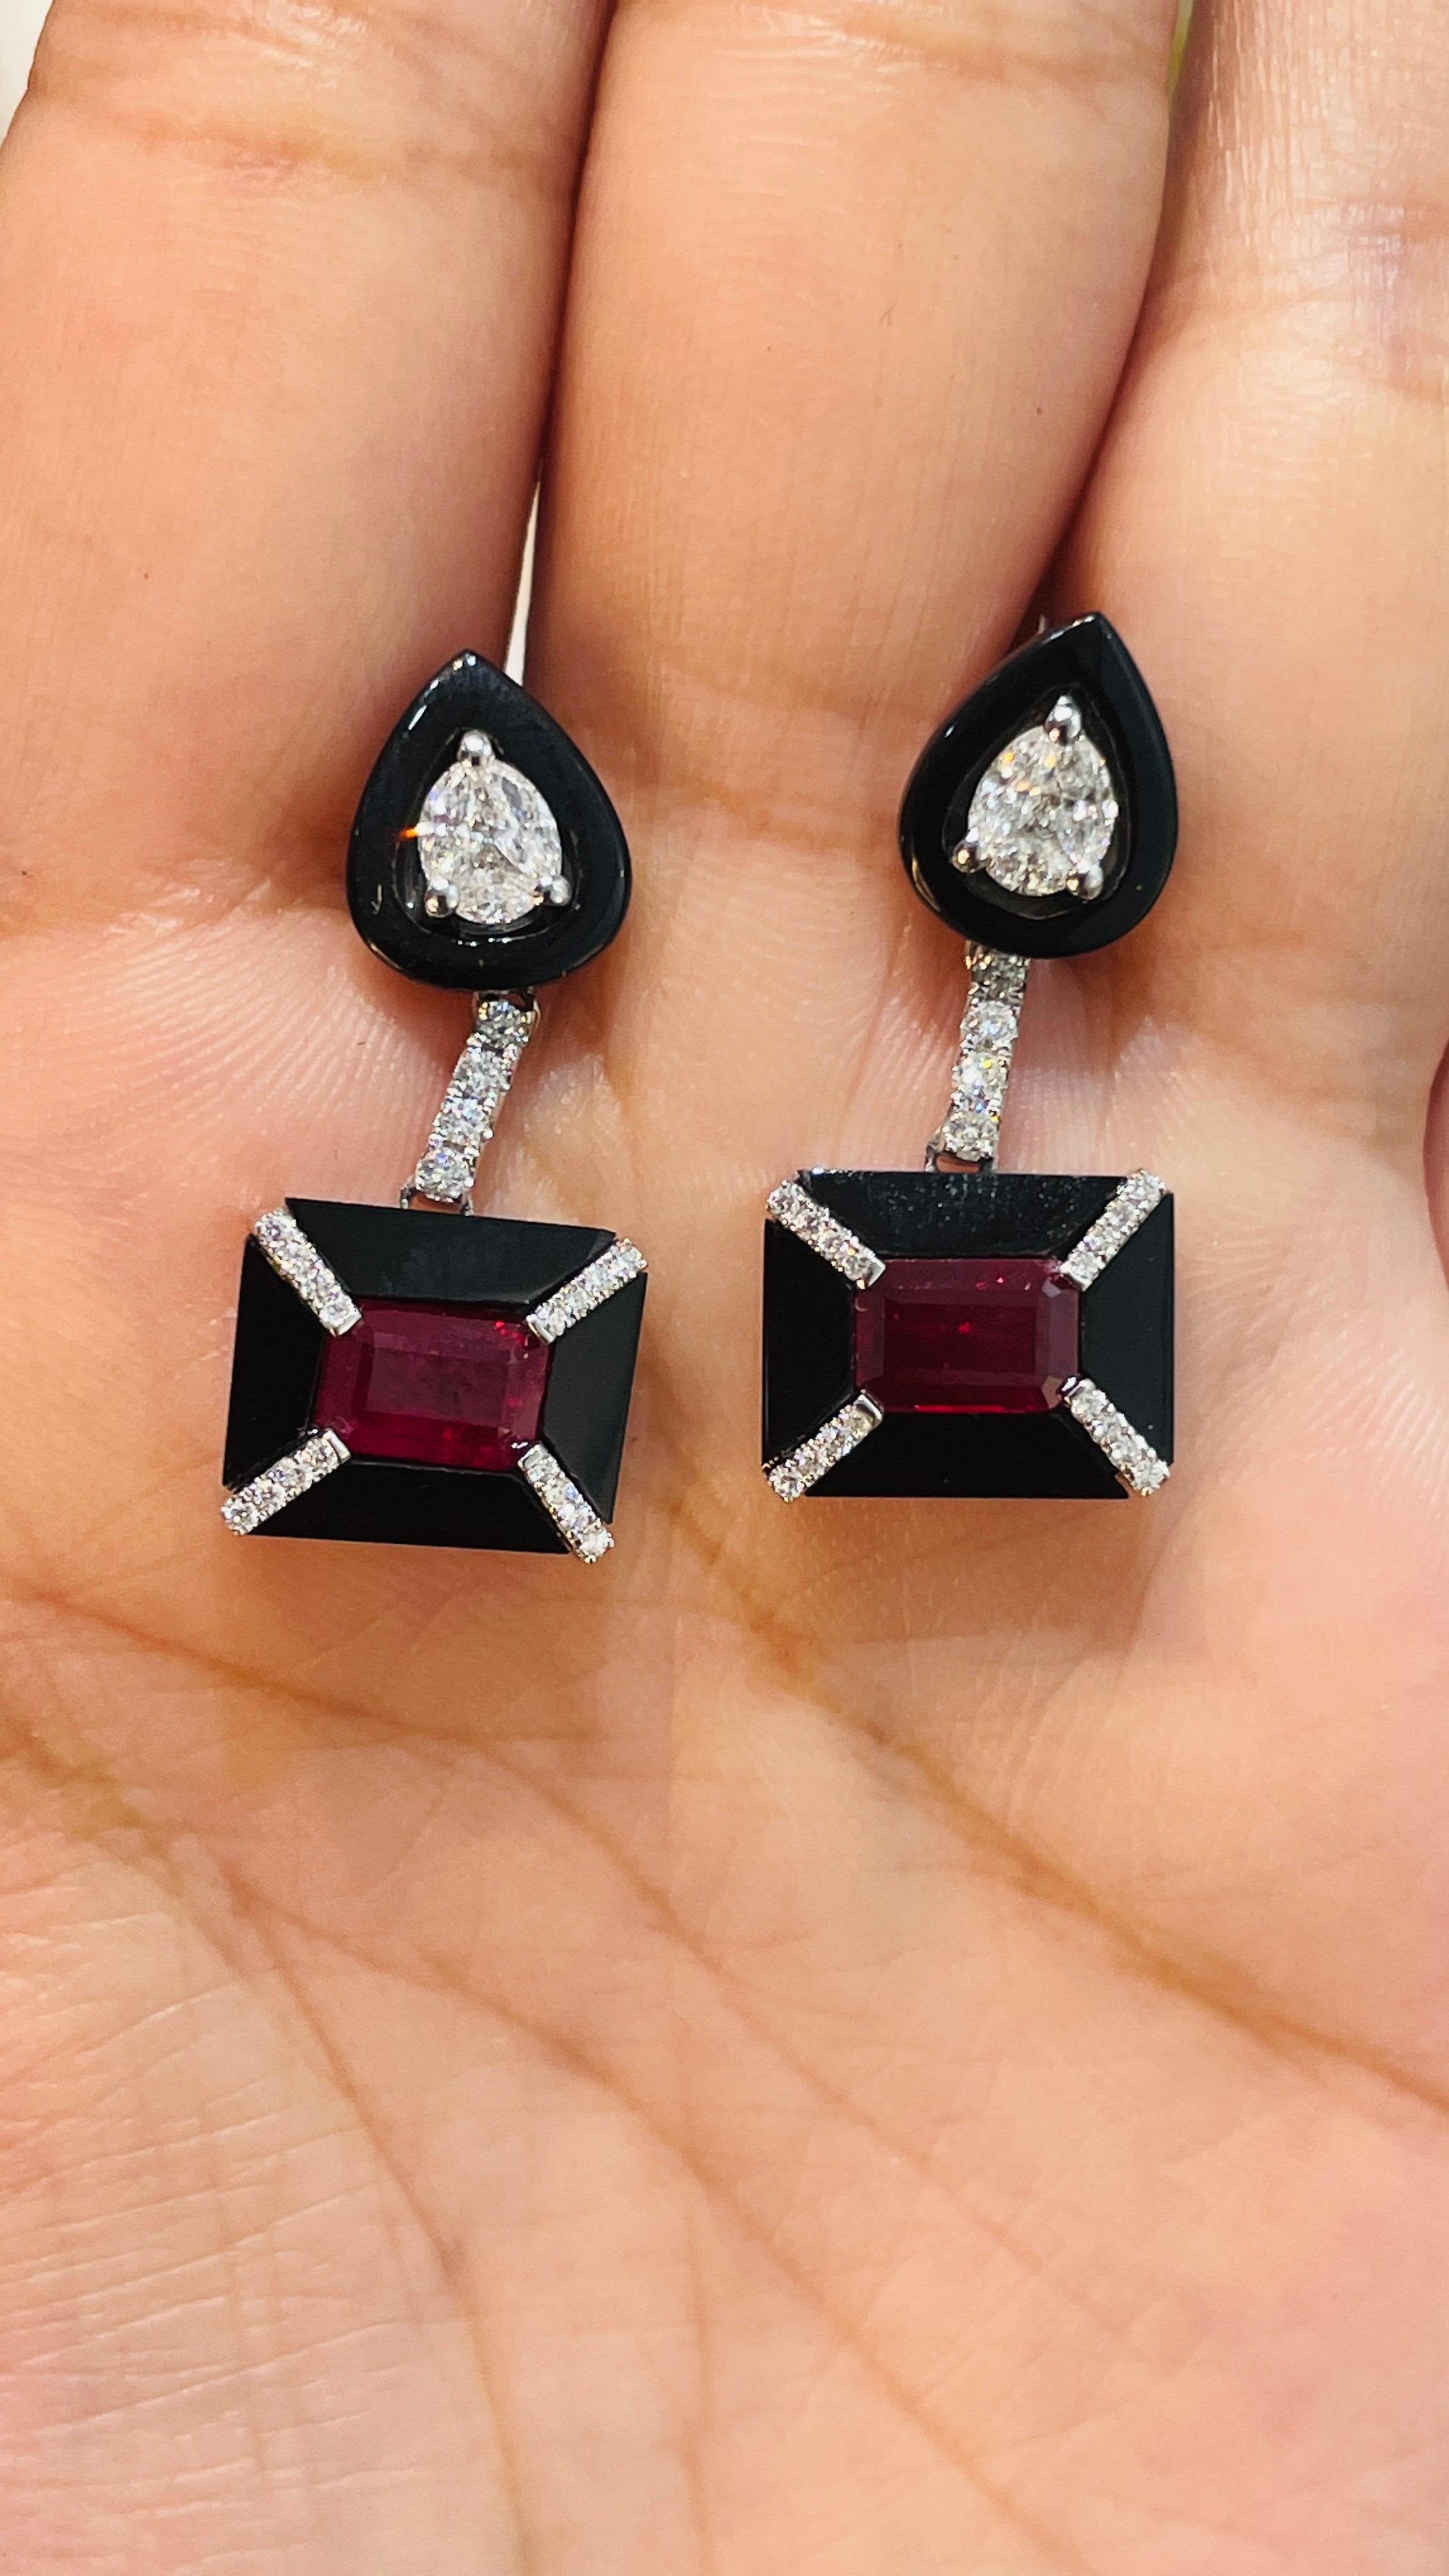 Ruby and black enameled Diamonds Dangle earrings to make a statement with your look. These earrings create a sparkling, luxurious look featuring octagon and mix cut gemstone.
If you love to gravitate towards unique styles, this piece of jewelry is